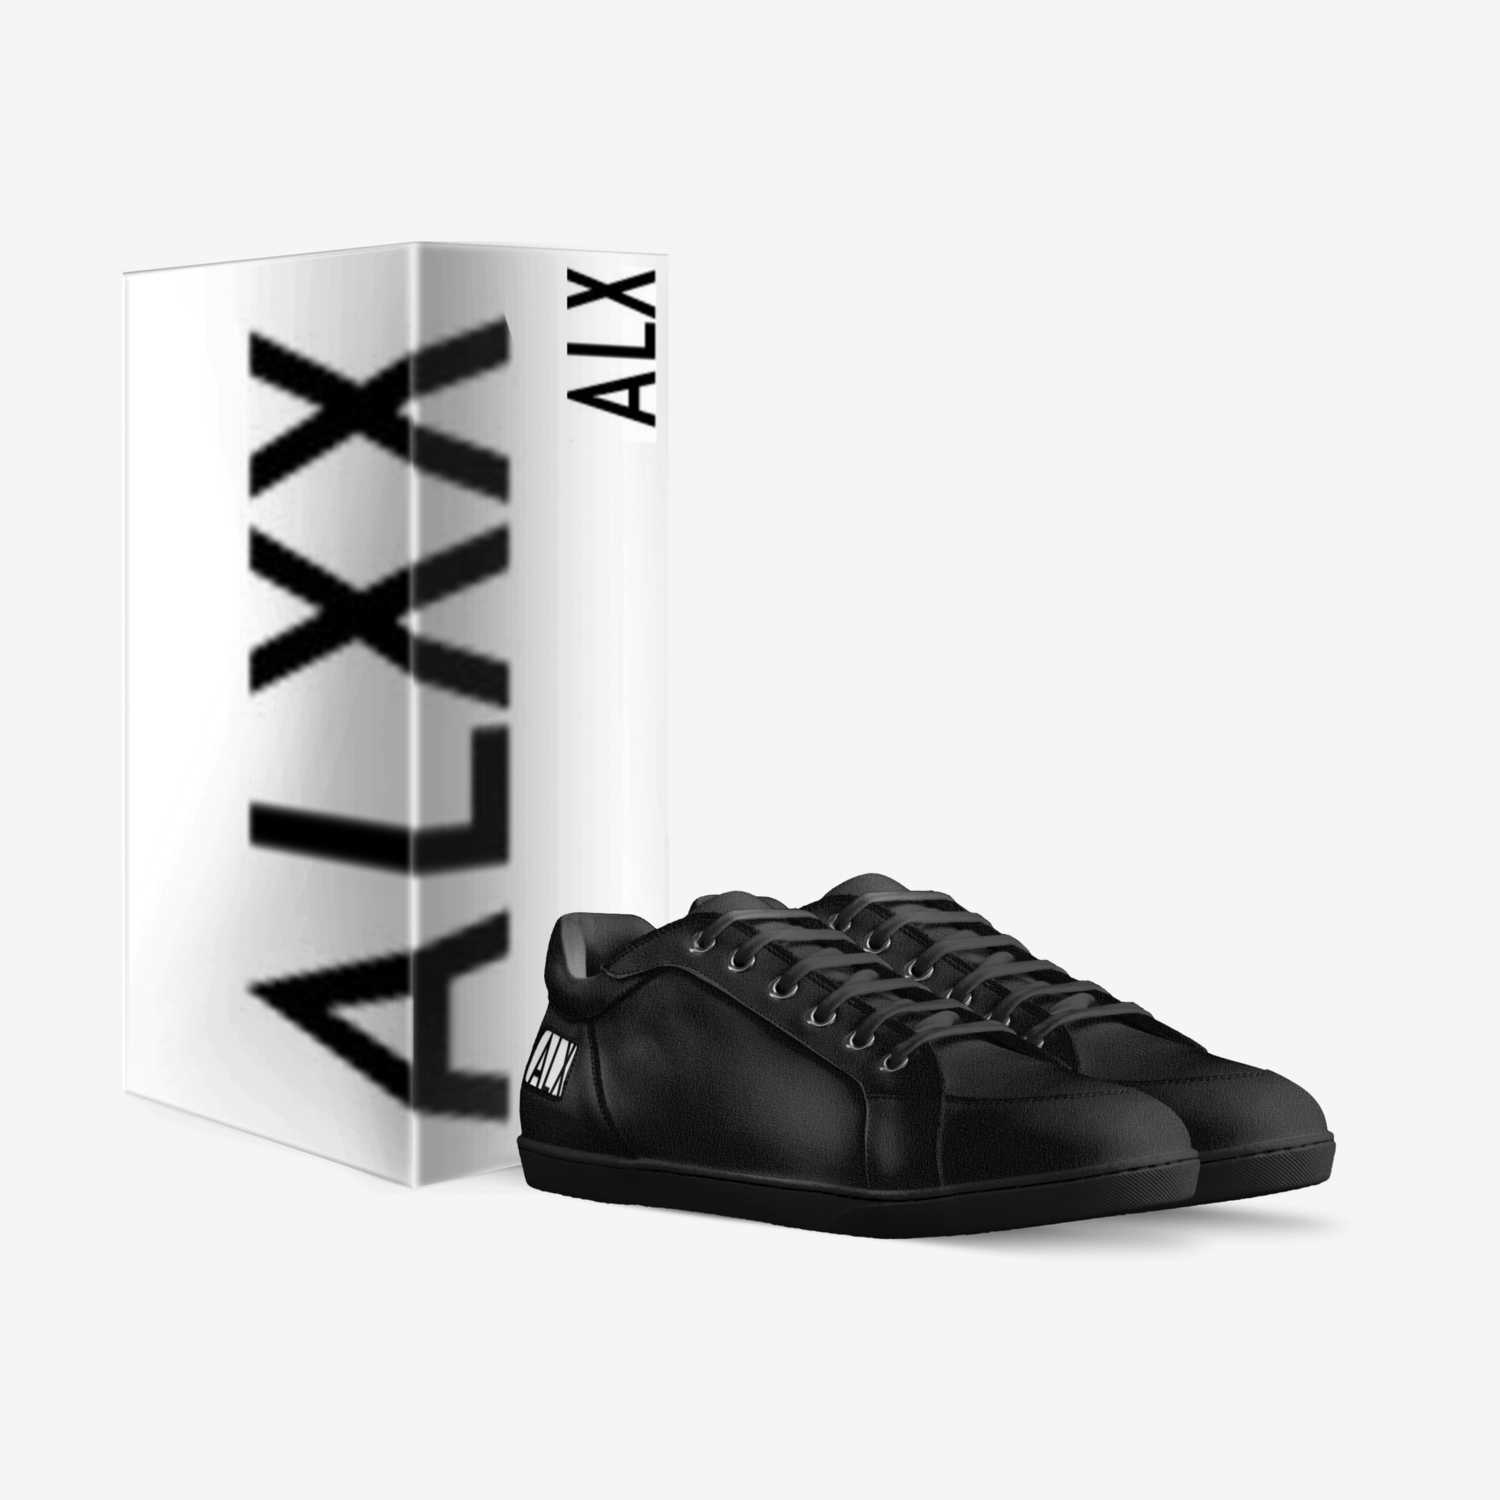 ALX2B custom made in Italy shoes by Alexander Bowie | Box view